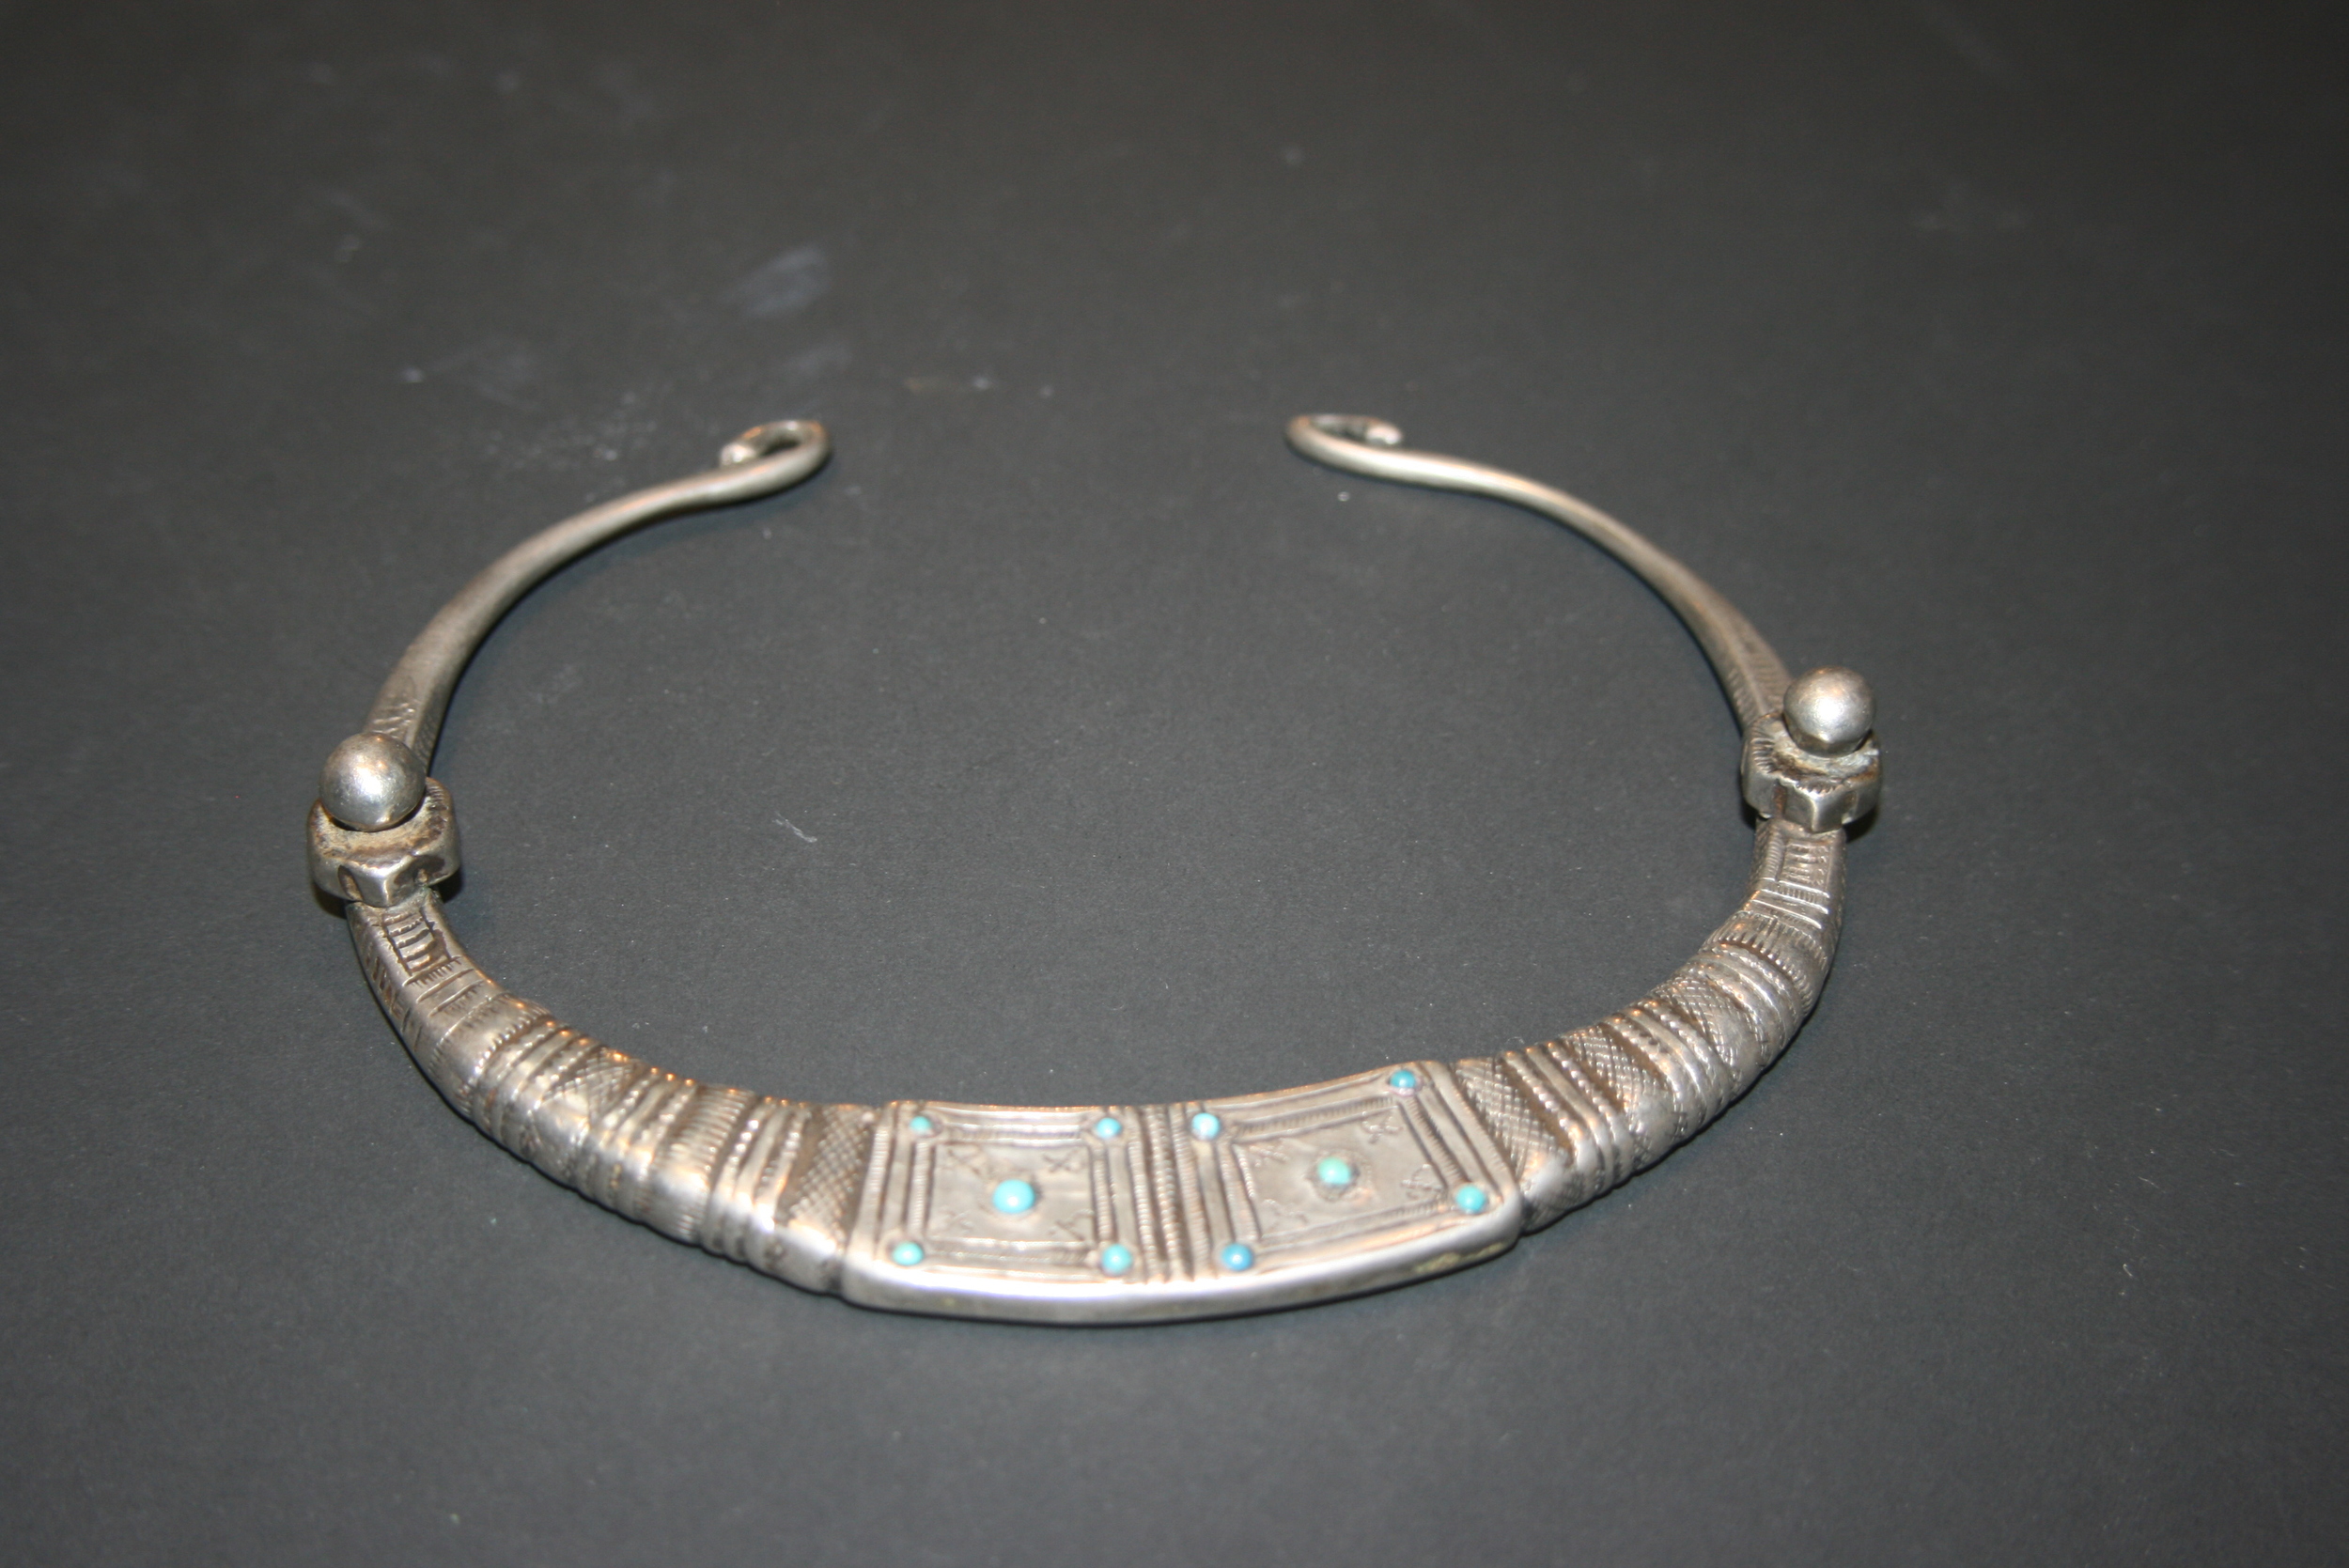 Old 19th century silver necklace from balochistan